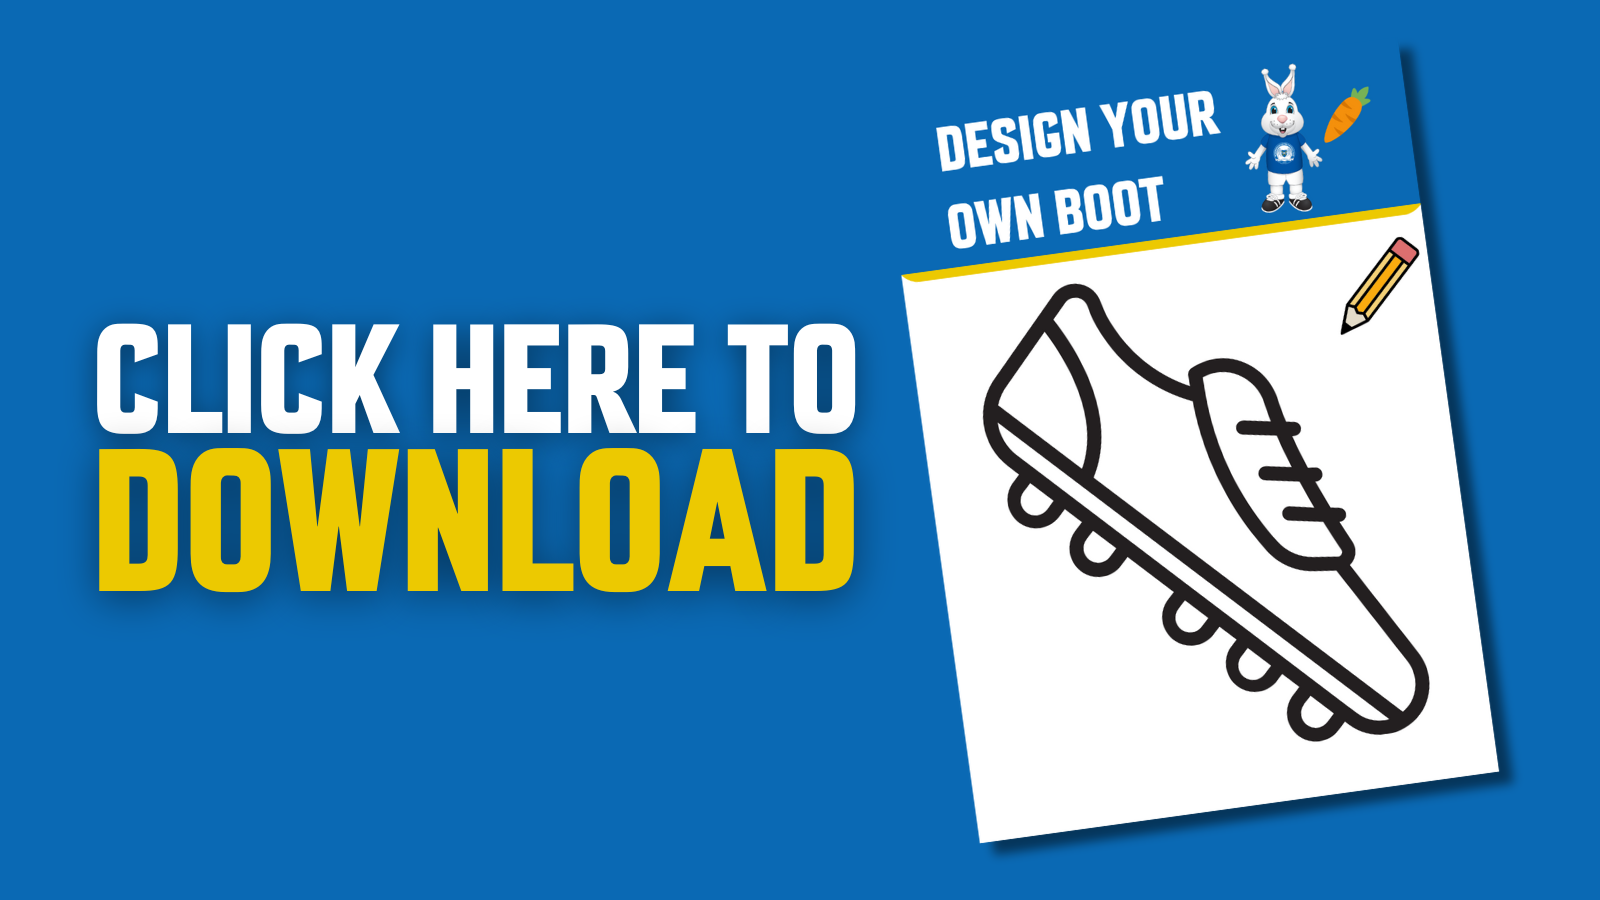 Design Your Own Boot